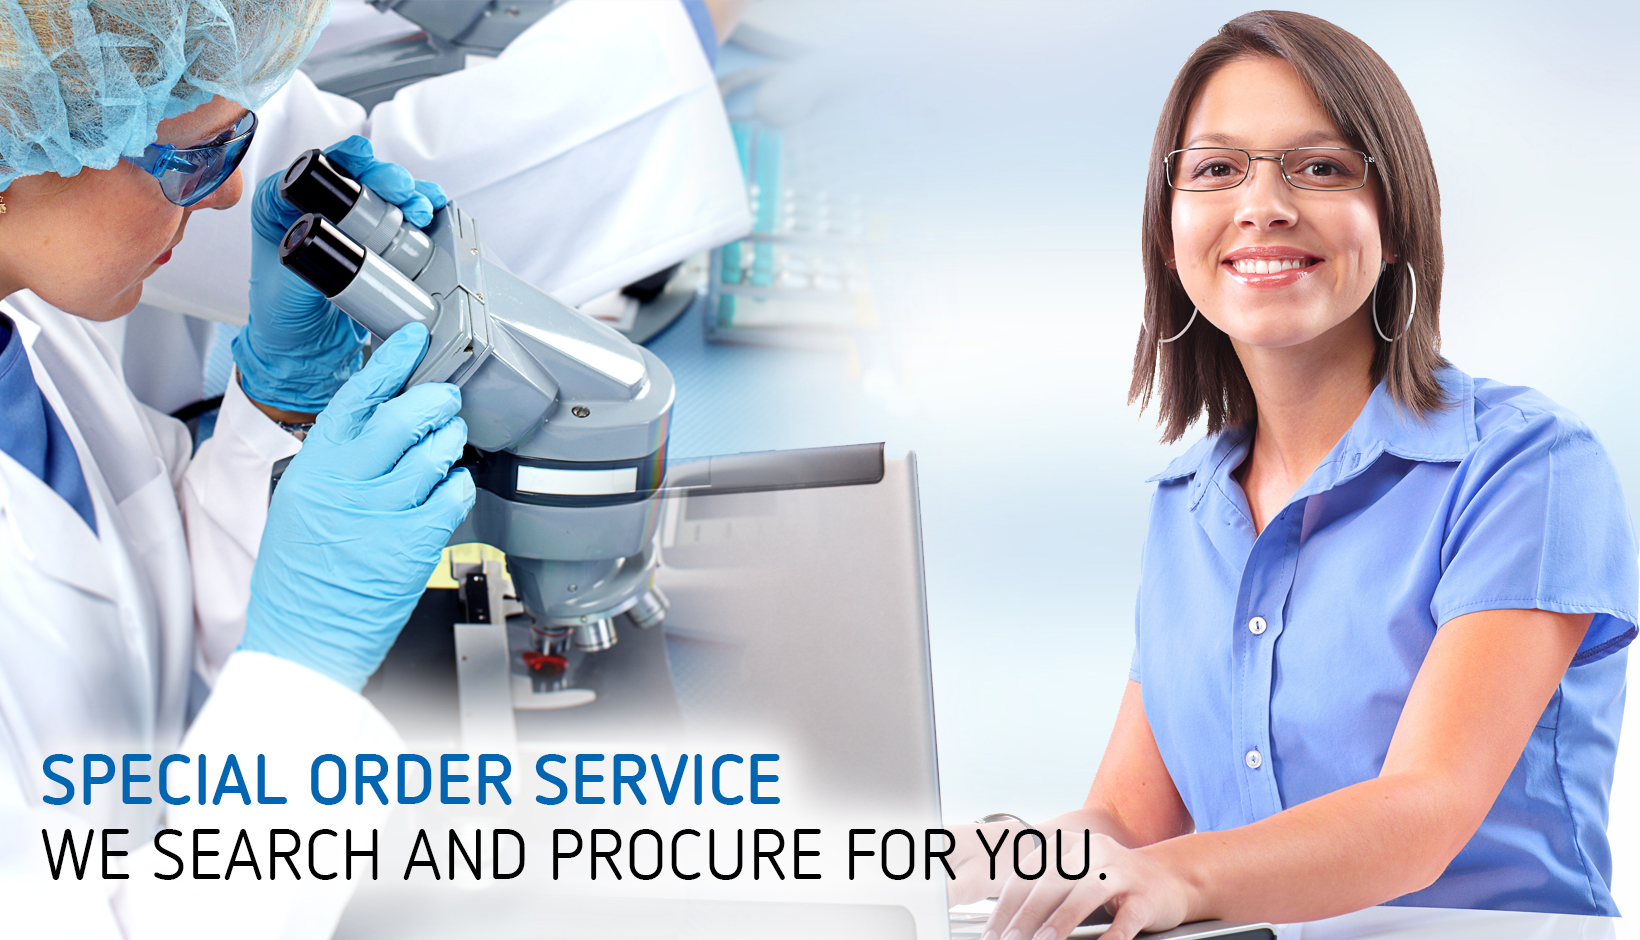 Special Order Service - We Search And Procure For You